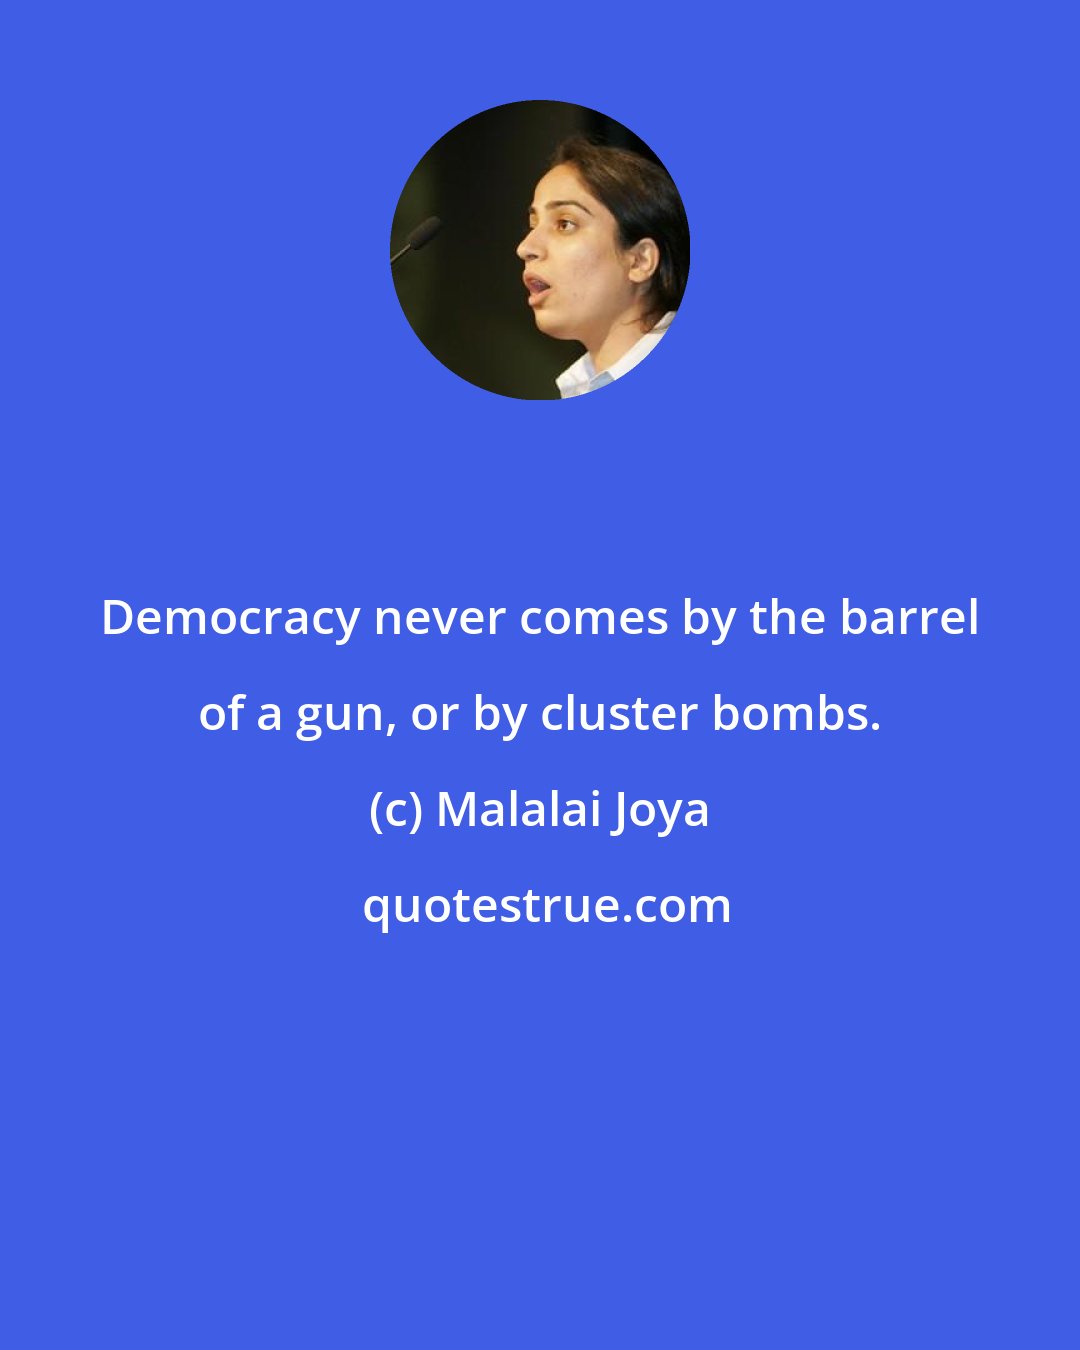 Malalai Joya: Democracy never comes by the barrel of a gun, or by cluster bombs.